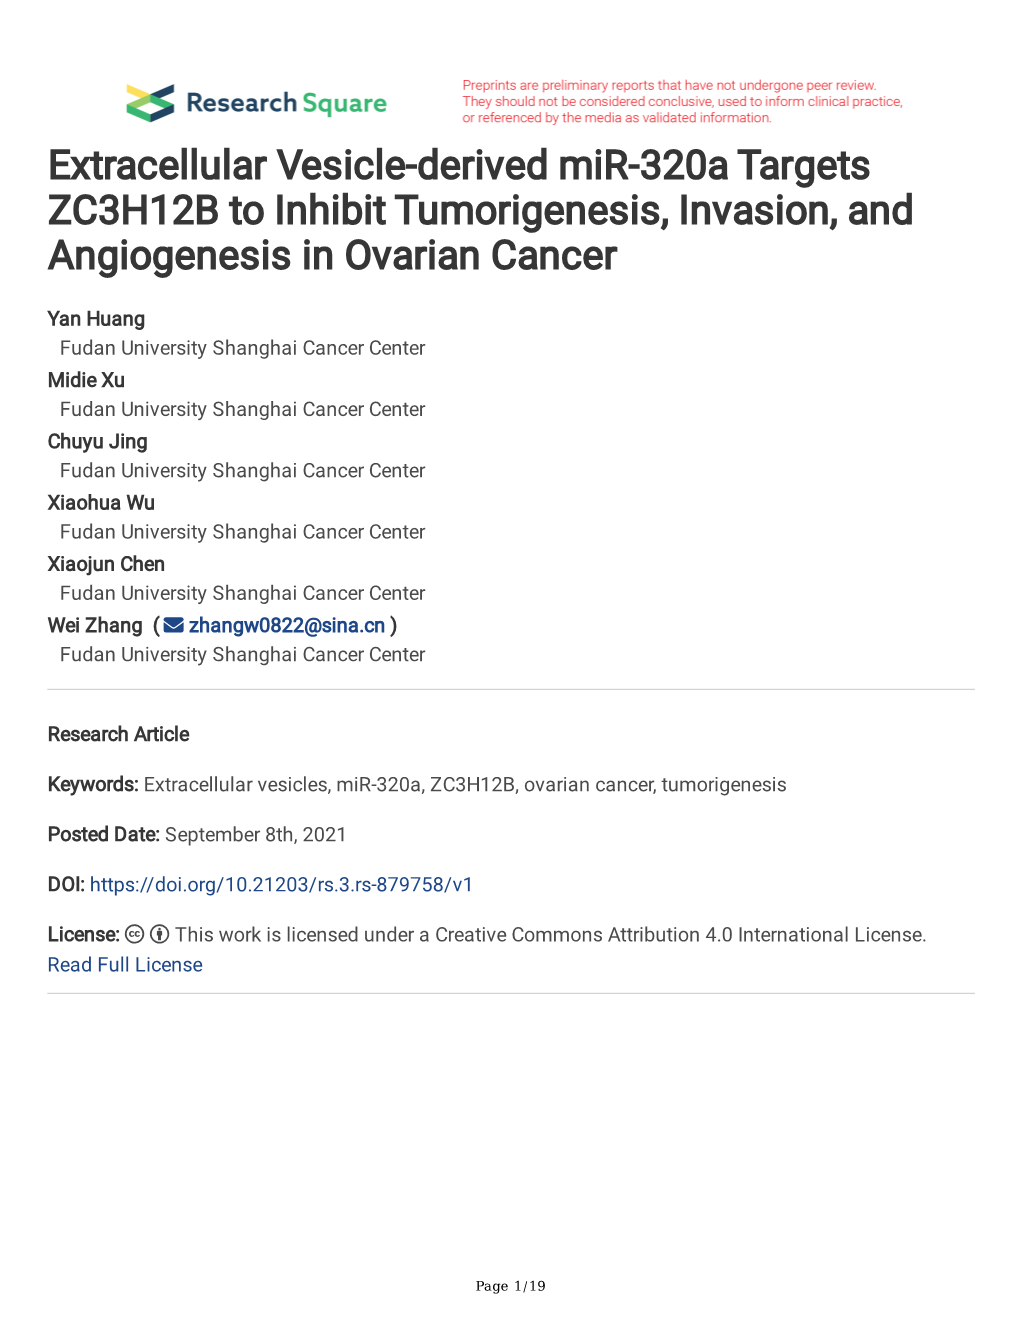 Extracellular Vesicle-Derived Mir-320A Targets ZC3H12B to Inhibit Tumorigenesis, Invasion, and Angiogenesis in Ovarian Cancer